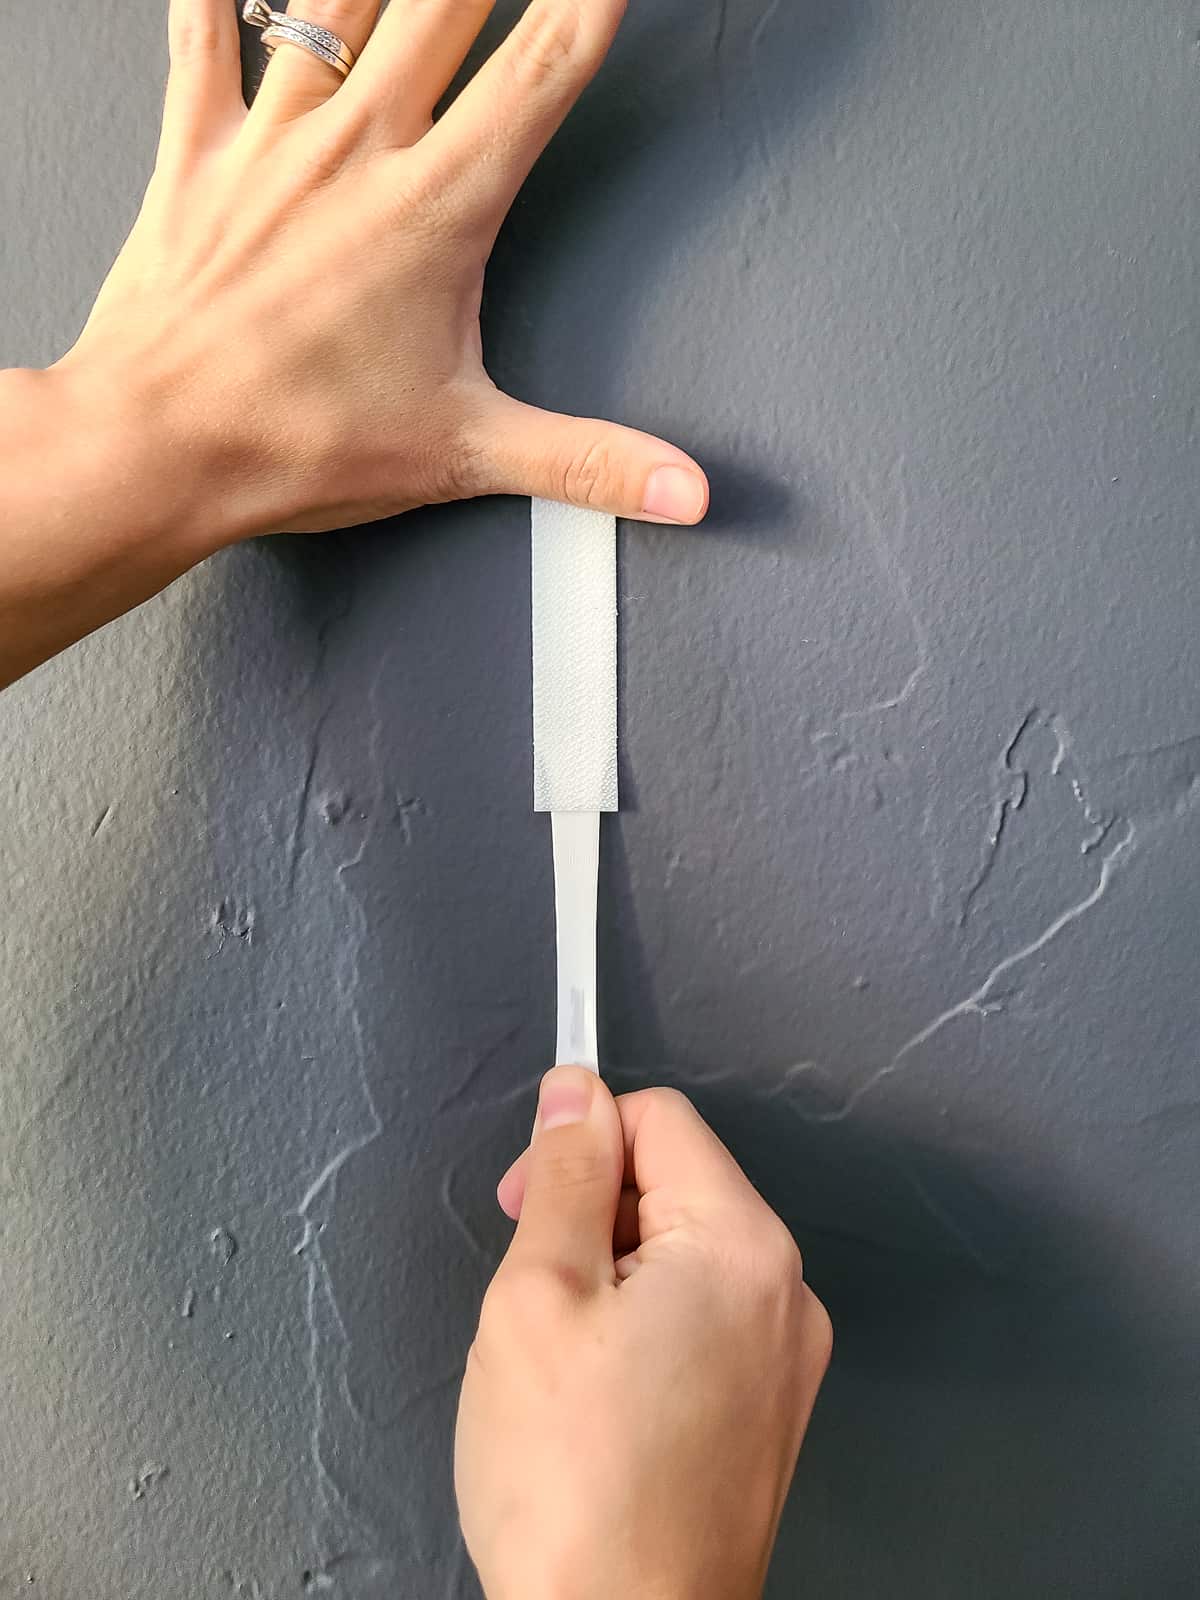 Command Large Refill, Damage Free Hanging Wall Adhesive Strips for Large  Indoor Wall Hooks, No Tools Removable Adhesive Strips for Christmas Hooks,  20